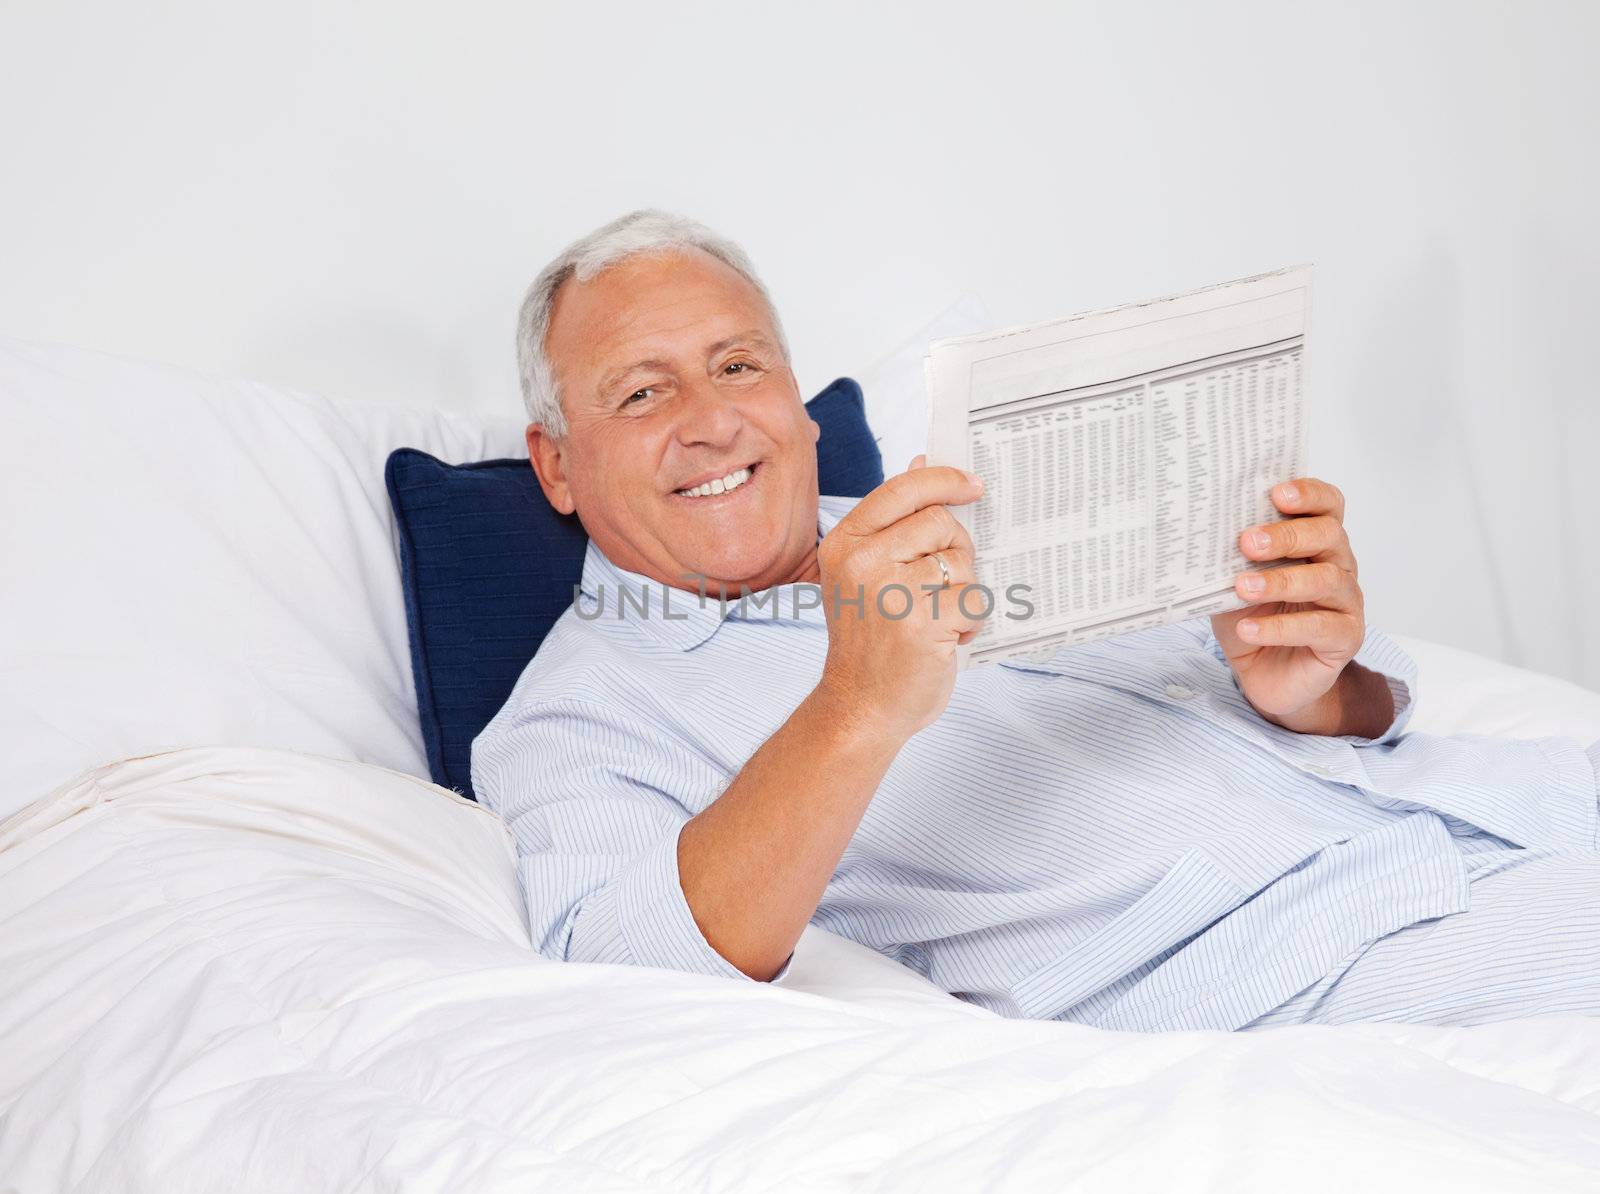 Portrait of relaxed senior man reading newspaper while lying on bed at home